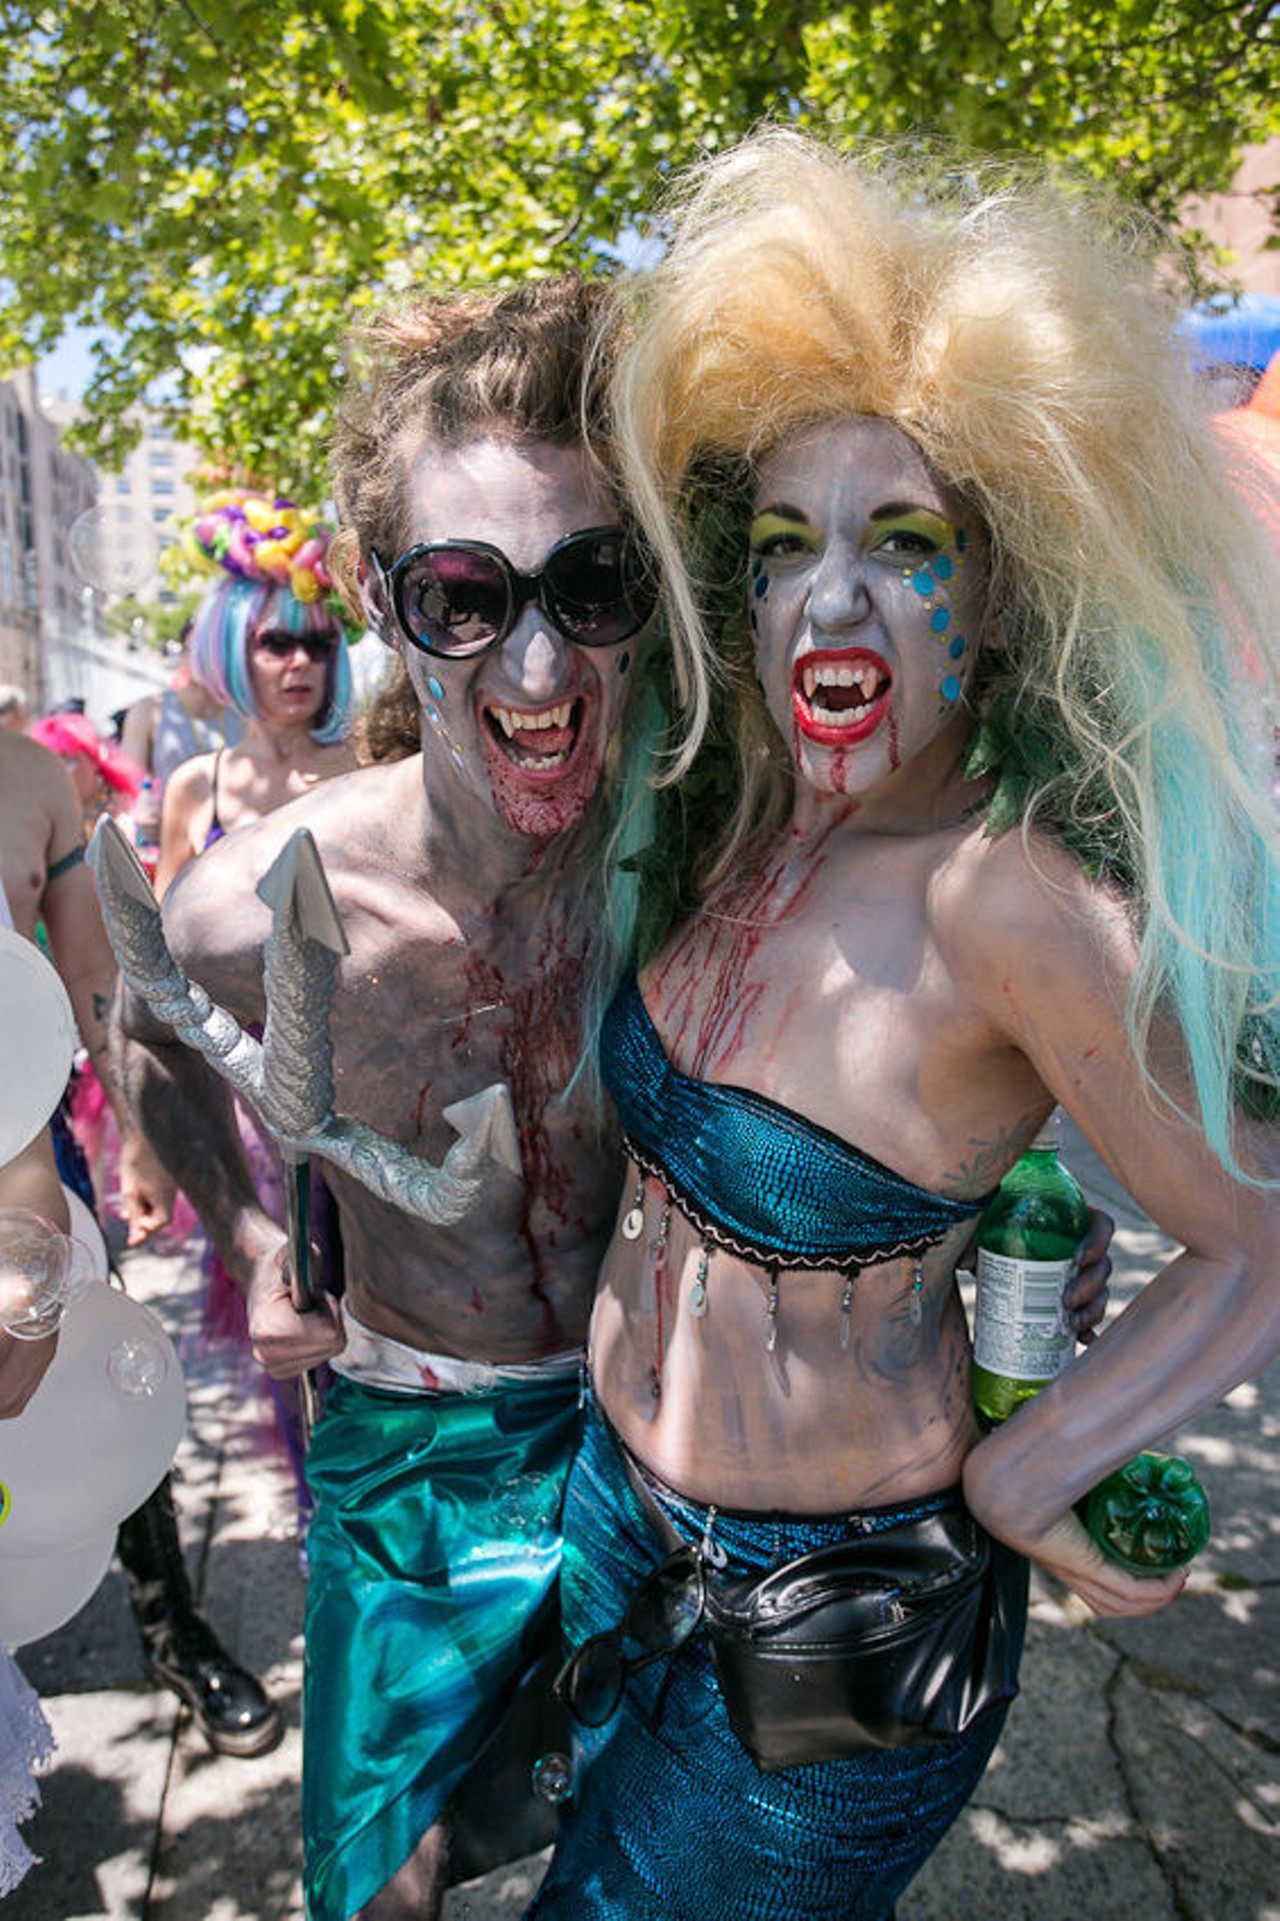 The 2012 edition of the Coney Island Mermaid Parade on June 24 offered what we've come to expect from the event: Stunning Mermaids in stunning costumes.